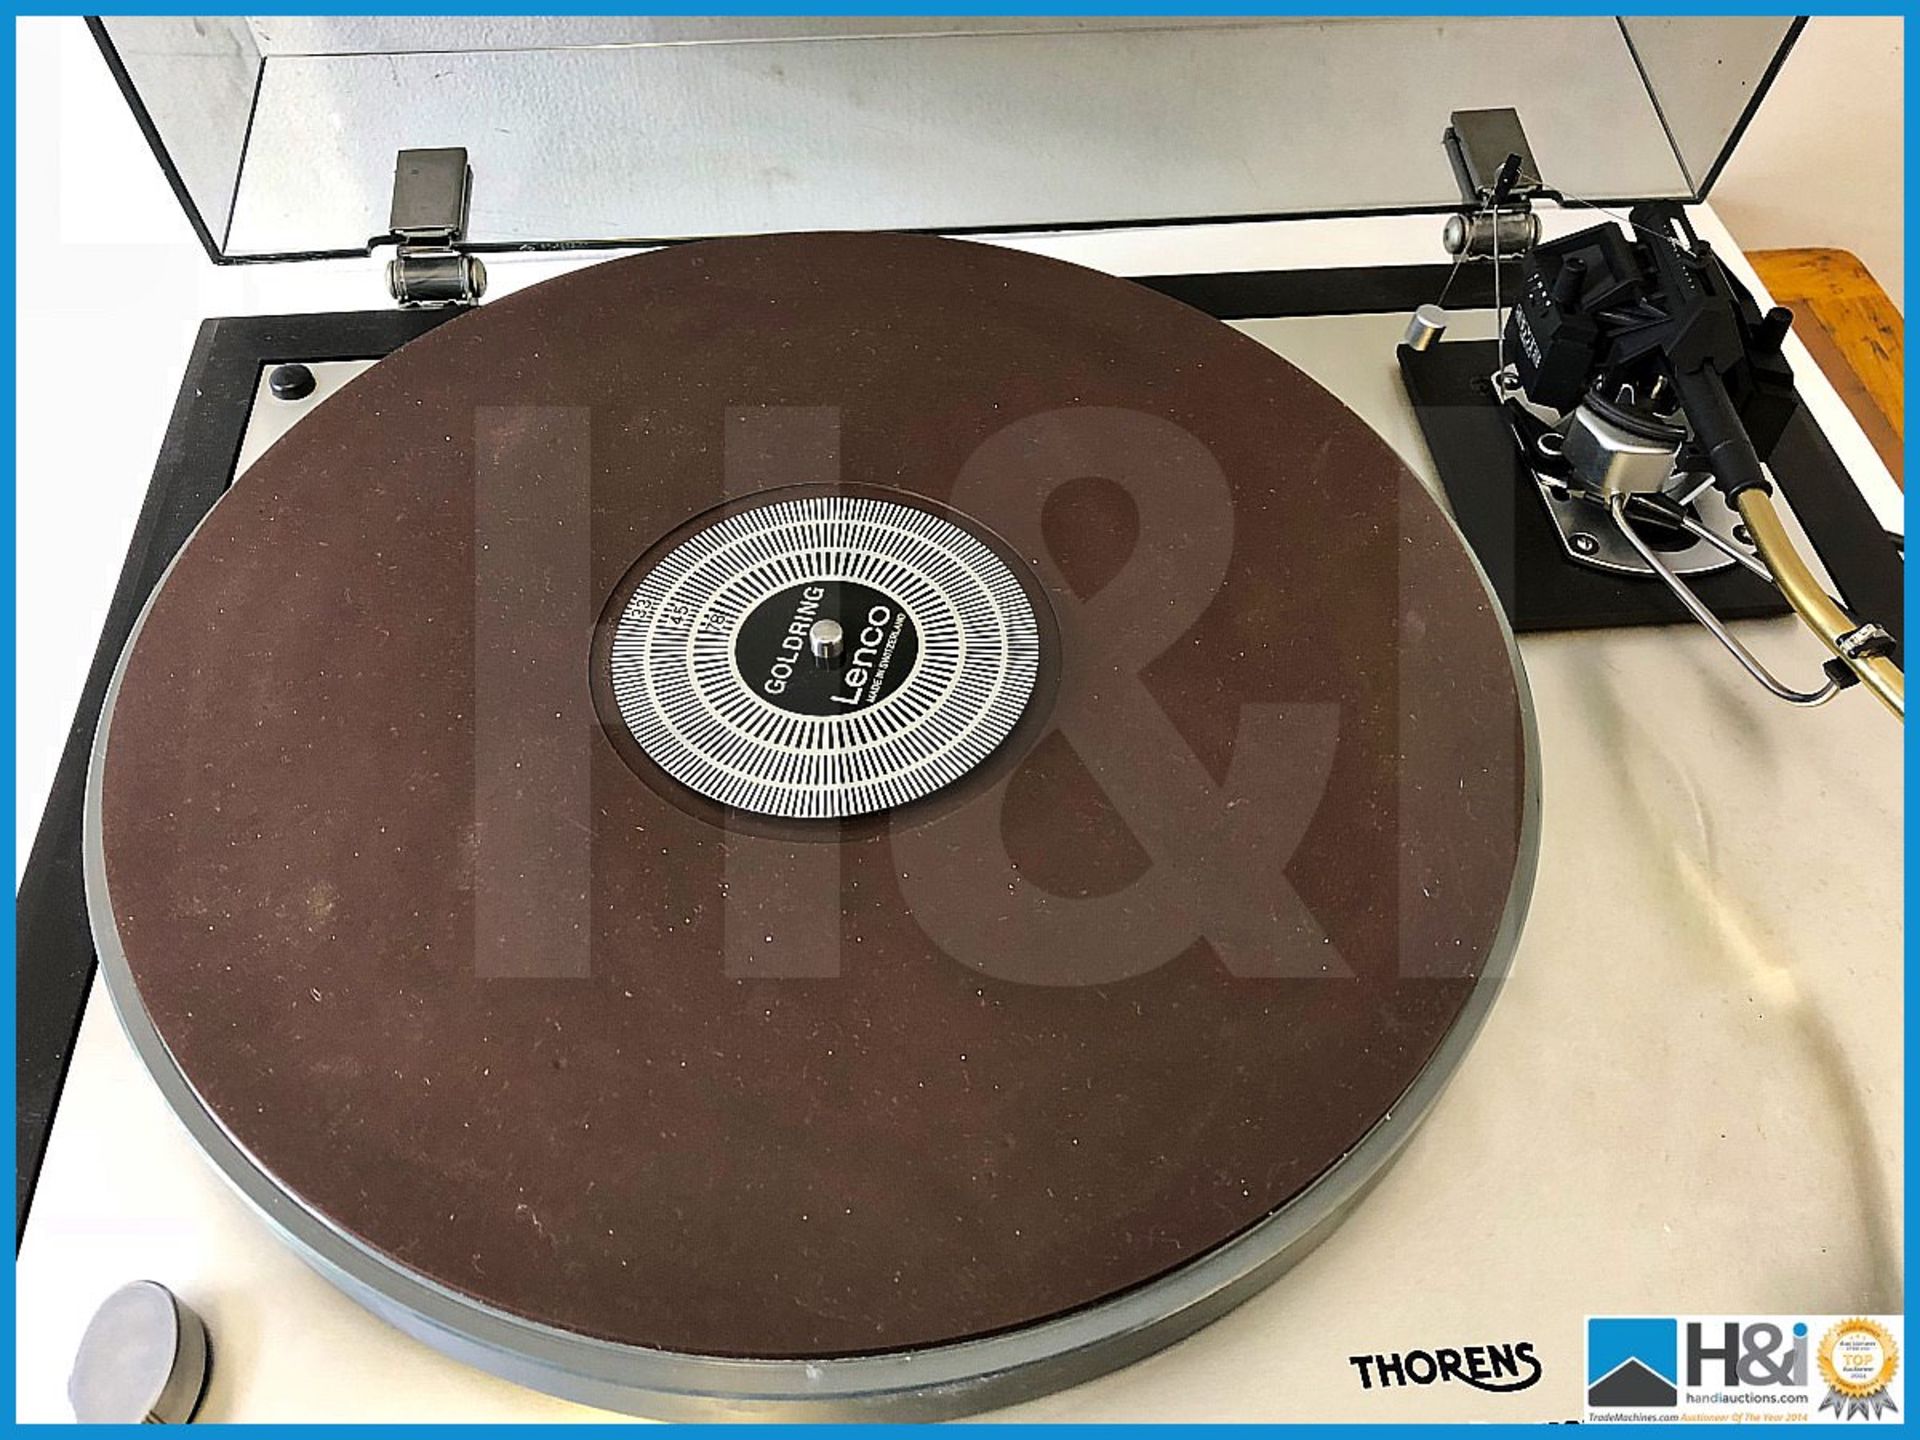 Thorens TD160-Super Turntable with SME tone arm with Arcam C77 cartridge in superb condition - Image 2 of 8